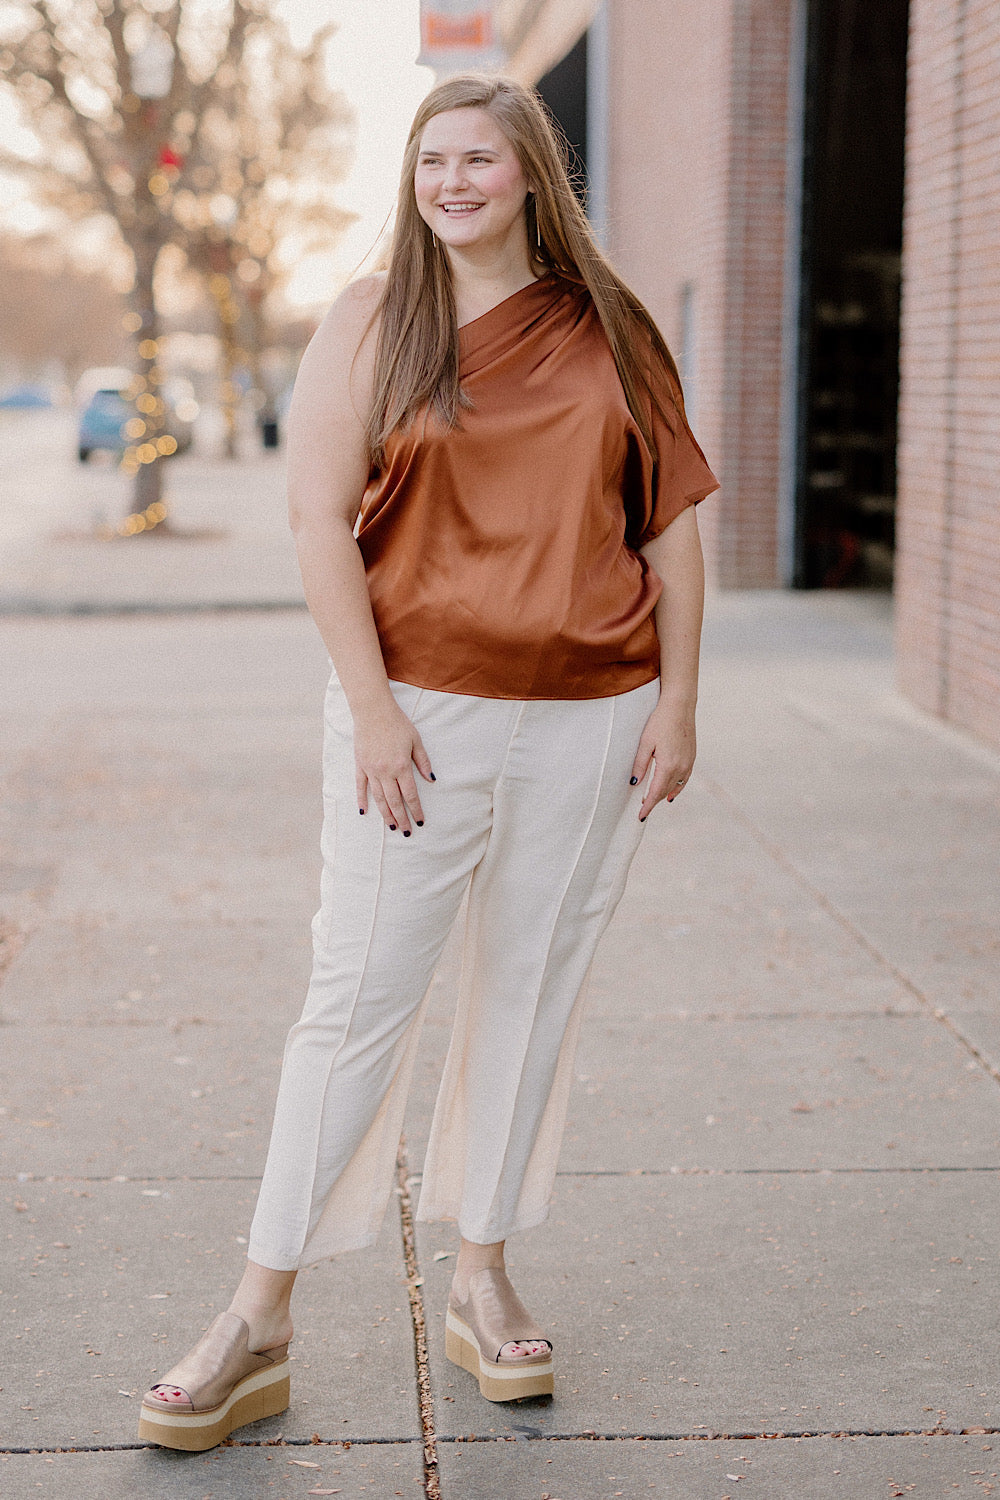 Haley One Shoulder Rust Top (Sizes S-2XL)